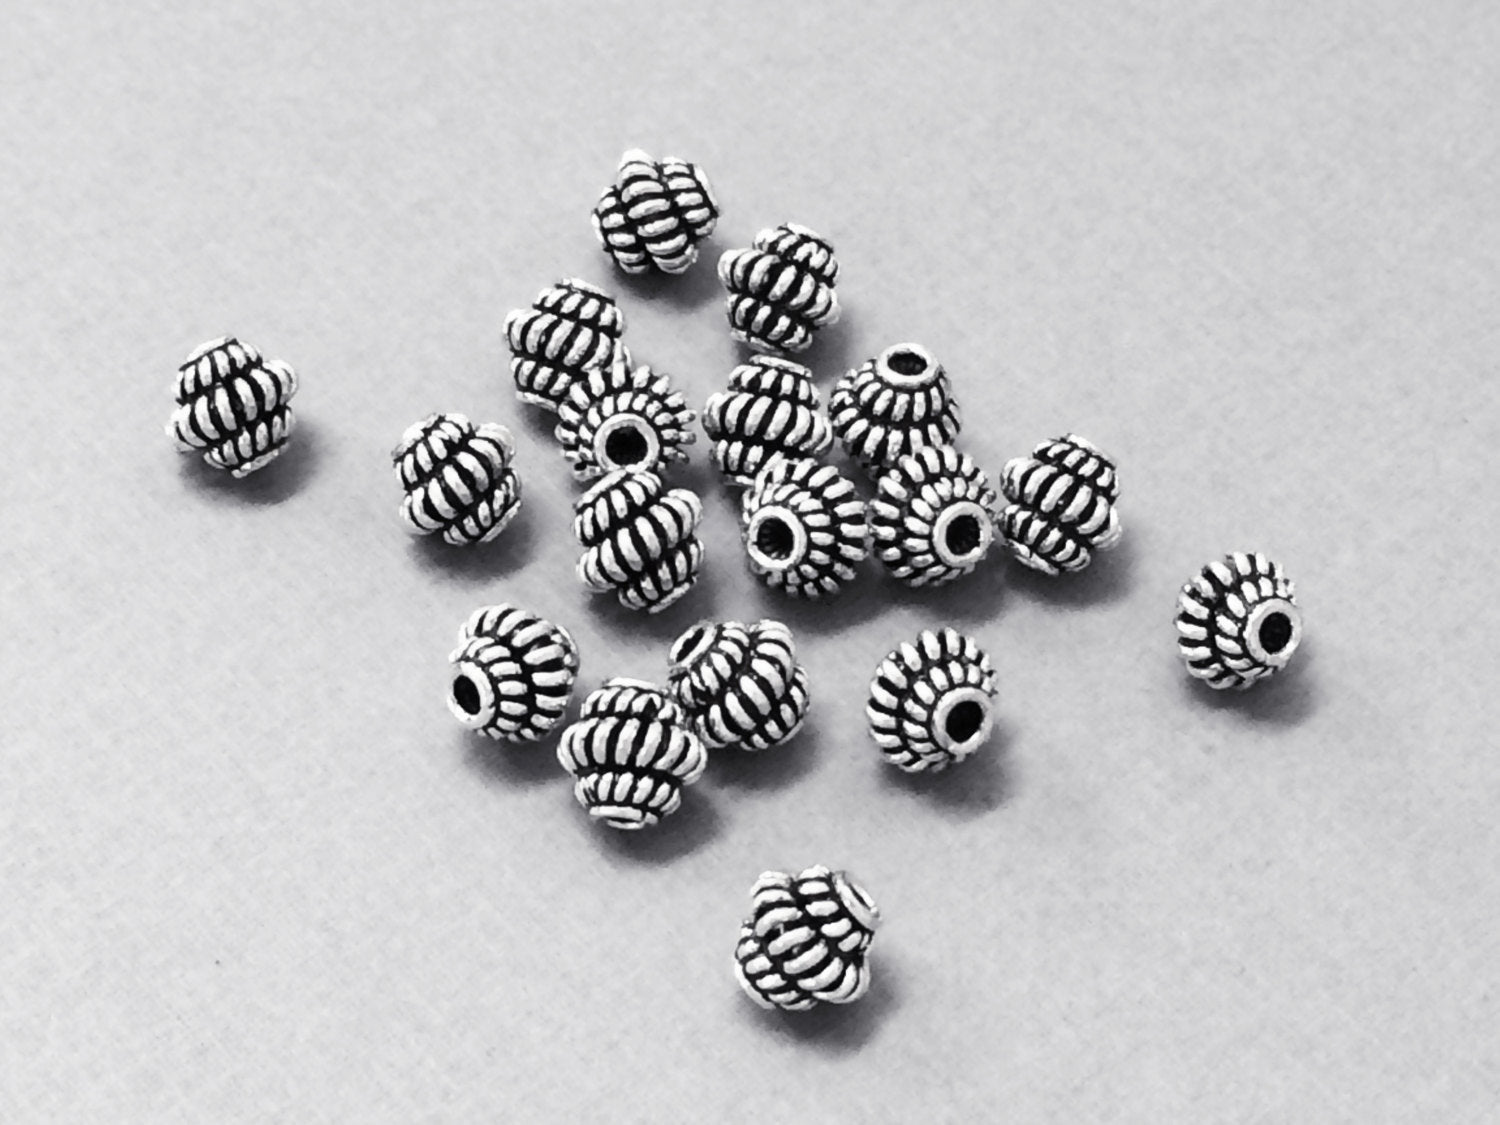 Bali Sterling Silver Spacer Beads | 6 x 3mm | 2 pieces